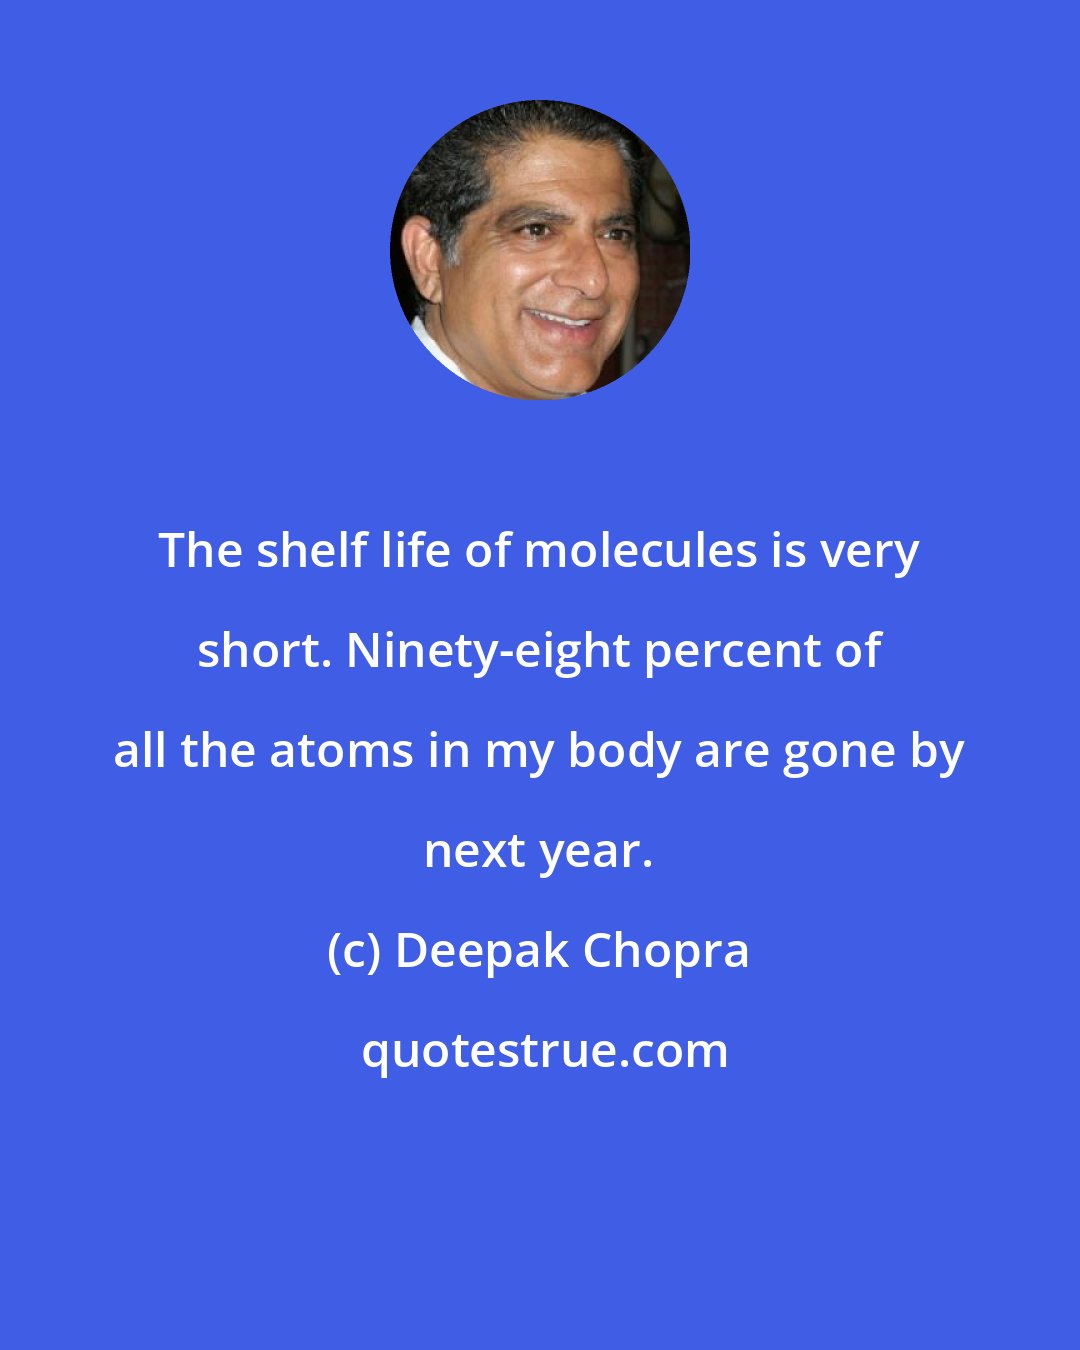 Deepak Chopra: The shelf life of molecules is very short. Ninety-eight percent of all the atoms in my body are gone by next year.